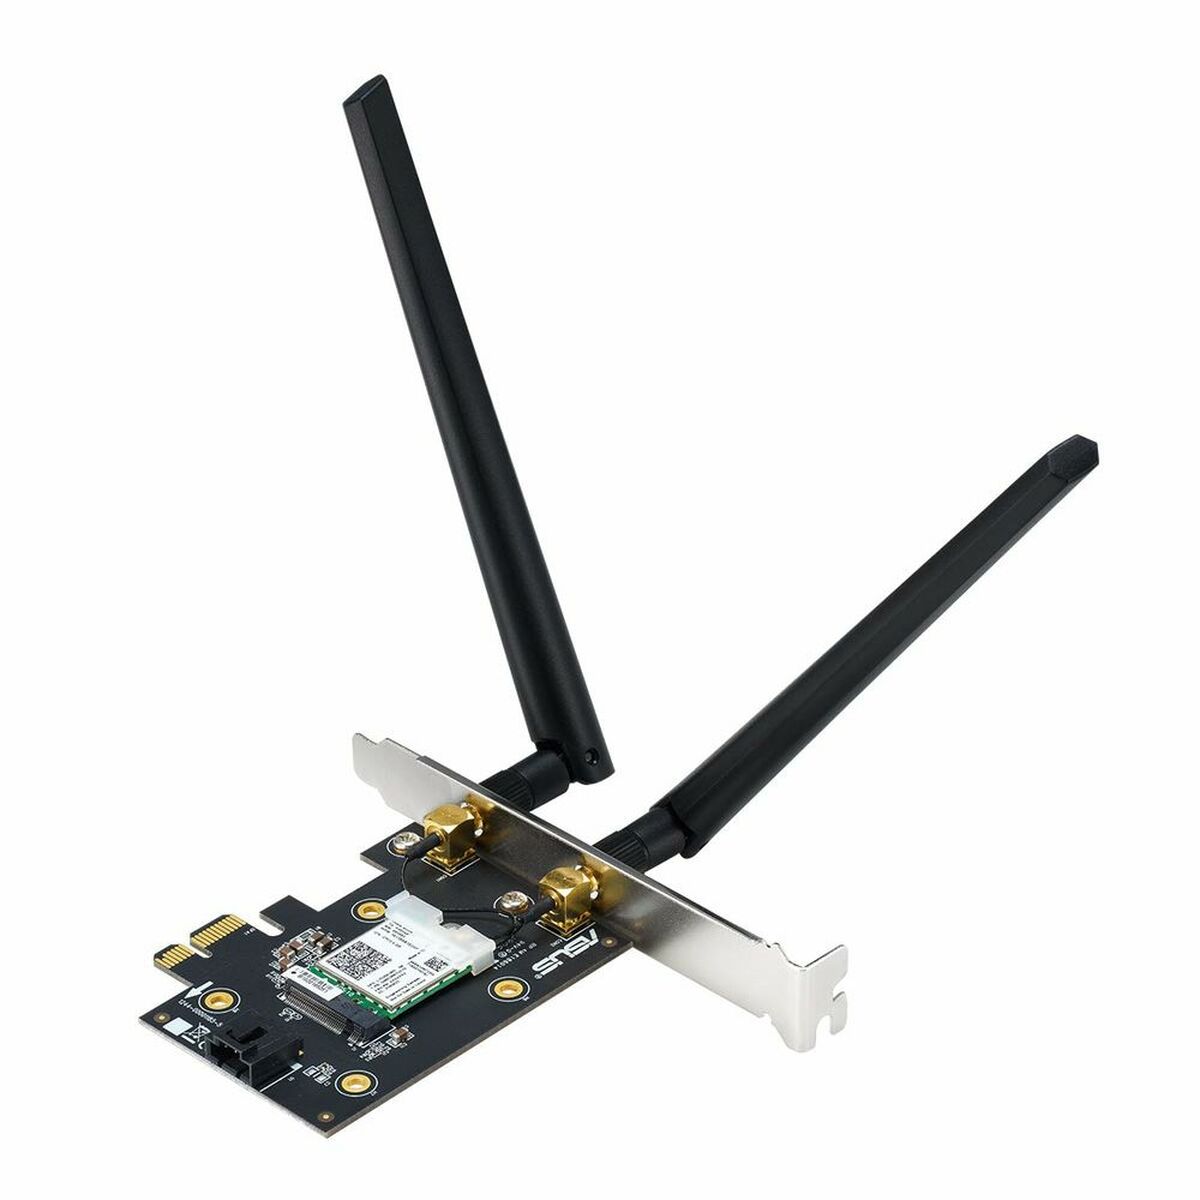 Wi-Fi Network Card Asus AX3000 3000 Mbps, Asus, Computing, Components, wi-fi-network-card-asus-ax3000-3000-mbps, Brand_Asus, category-reference-2609, category-reference-2803, category-reference-2811, category-reference-t-19685, category-reference-t-19912, category-reference-t-21360, computers / components, Condition_NEW, Price_50 - 100, Teleworking, RiotNook